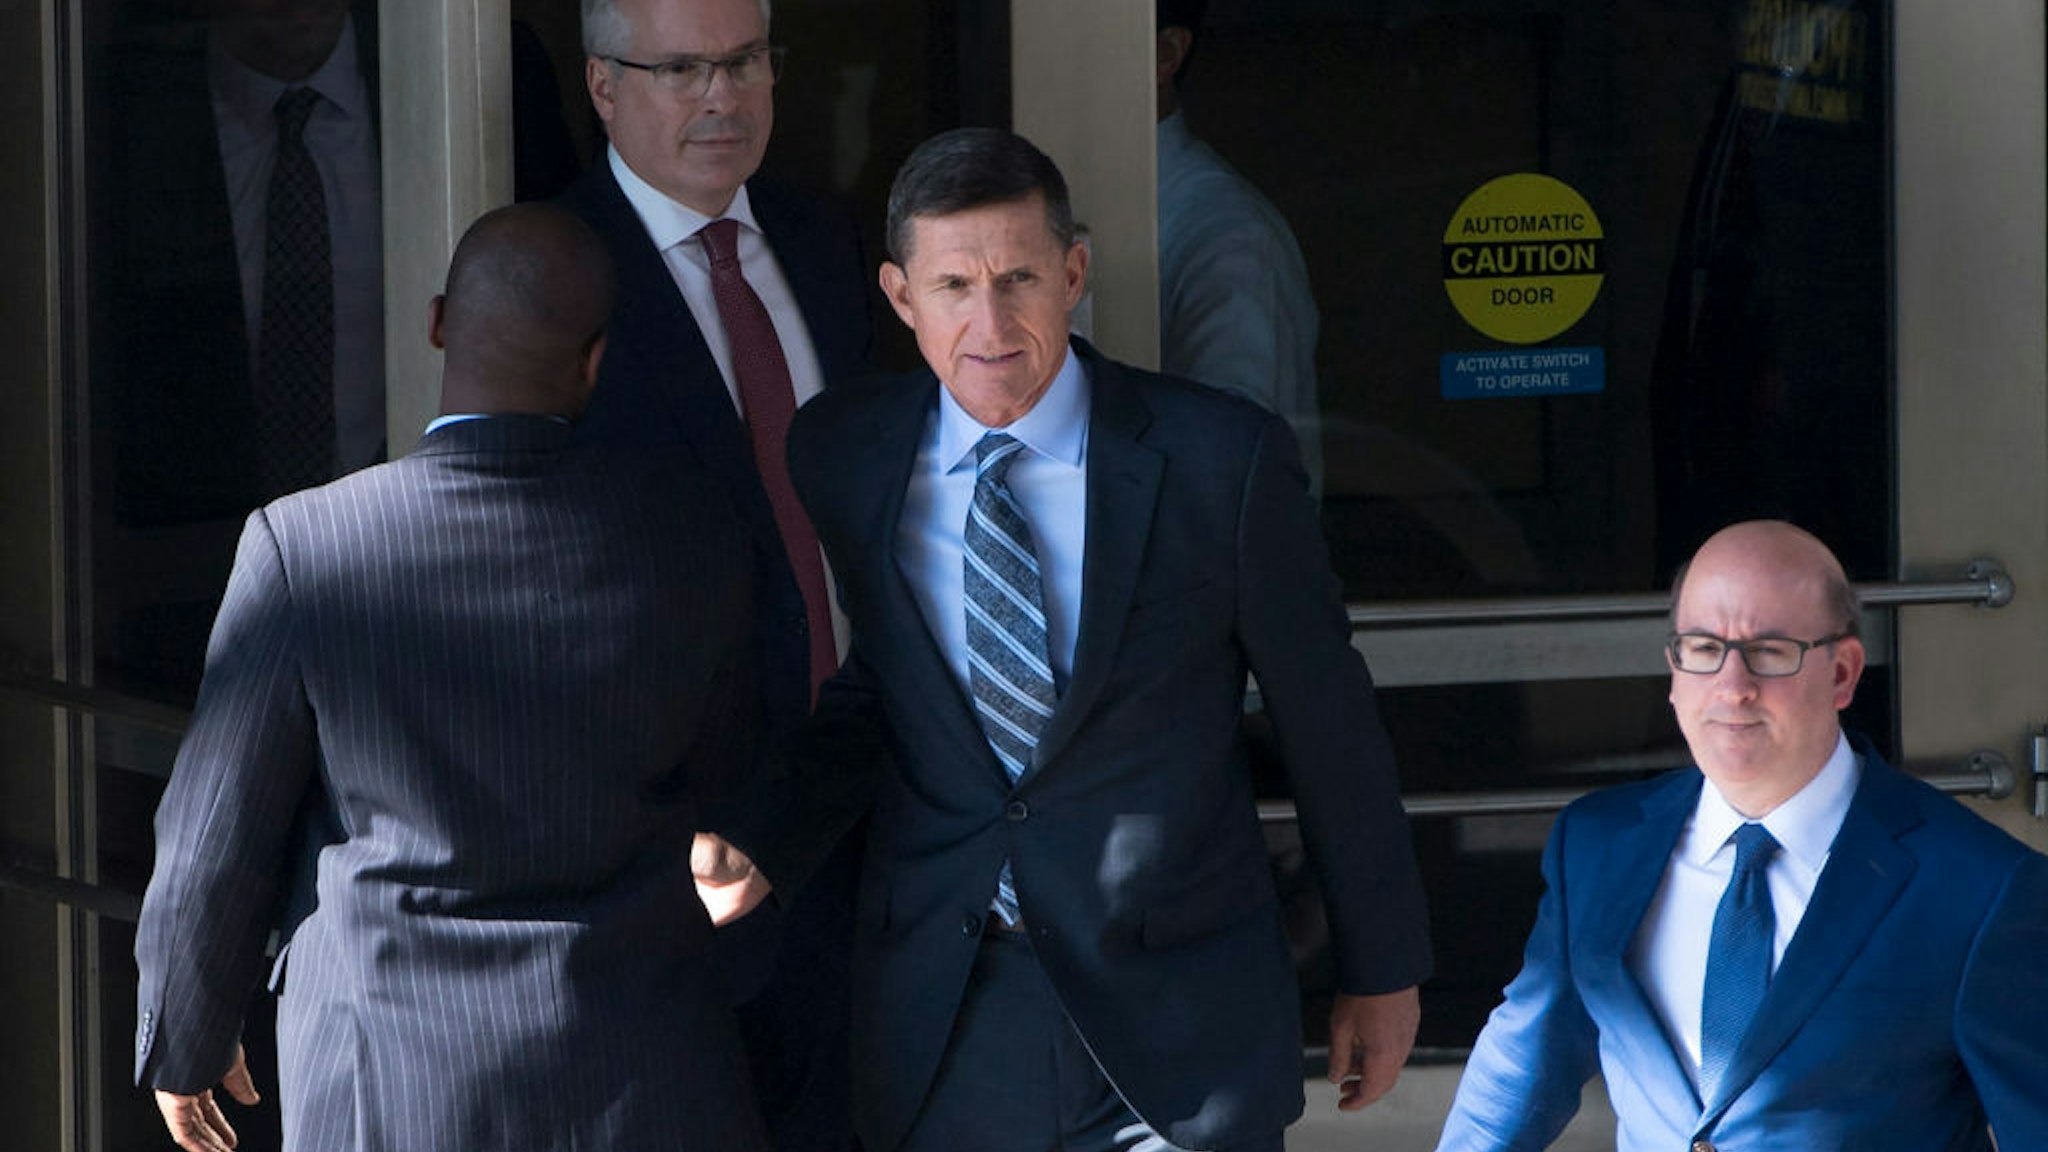 Donald Trump's former top advisor Michael Flynn pleaded guilty Friday to lying over his contacts with Russia, in a dramatic escalation of the FBI's probe into possible collusion between the Trump campaign and Moscow. The fourth, and most senior, figure indicted so far in the investigation into Russian interference in last year's election, Flynn appeared in federal court in Washington for a plea hearing less than two hours after the charges against him were made public. Ex-Trump aide Flynn says he recognizes his actions 'were wrong'. / AFP PHOTO / SAUL LOEB (Photo credit should read SAUL LOEB/AFP via Getty Images)